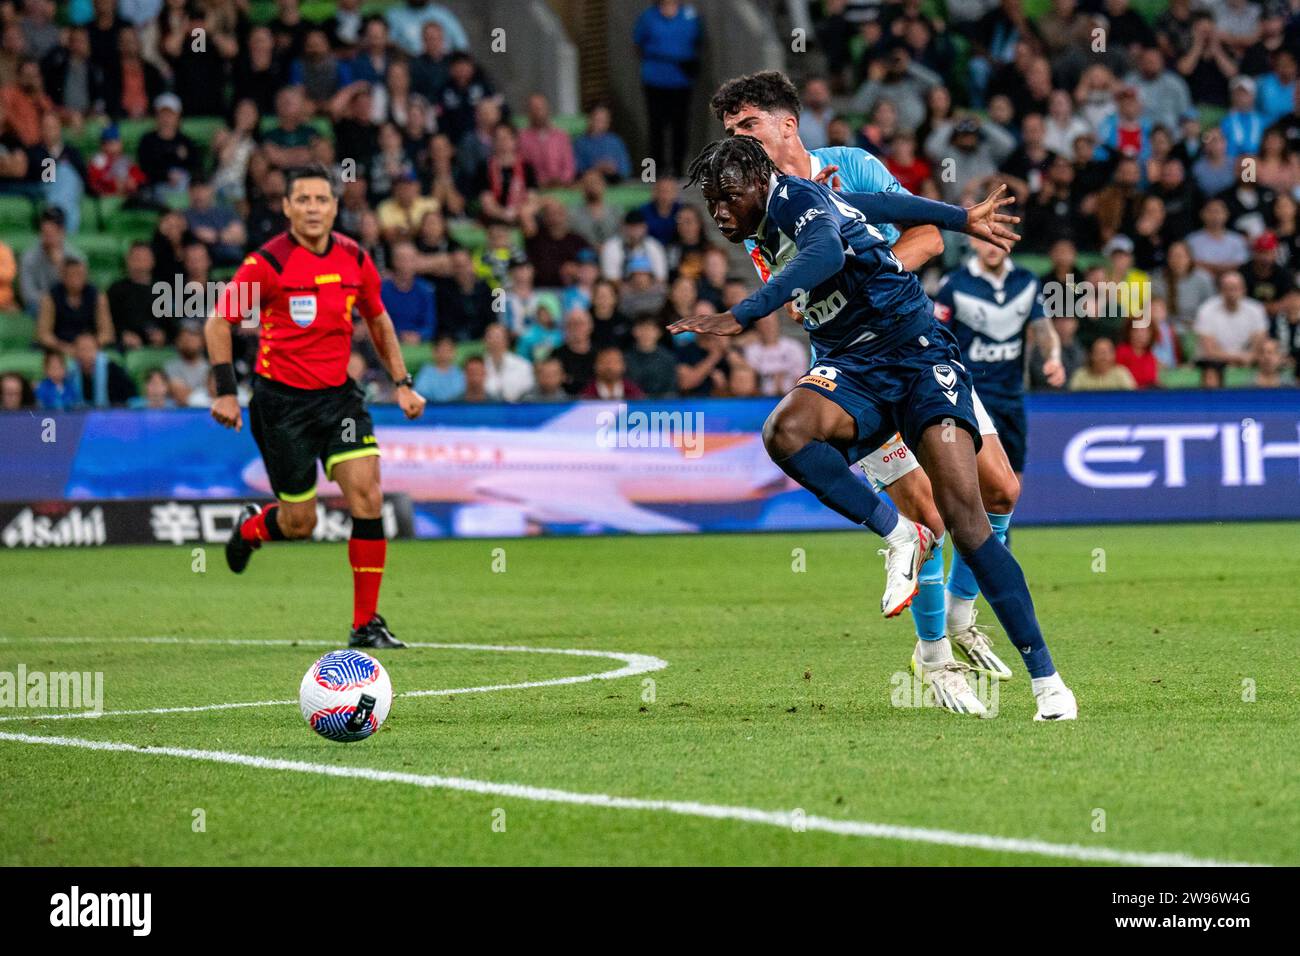 Melbourne, Australia. 23 December, 2023. Melbourne Victory FC Midfielder Franco Lino (#28) takes a shot at goal from outside the box during the Isuzu UTE A-League match between Melbourne City FC and Melbourne Victory FC at AAMI Park in Melbourne, Australia. Credit: James Forrester/Alamy Live News Stock Photo